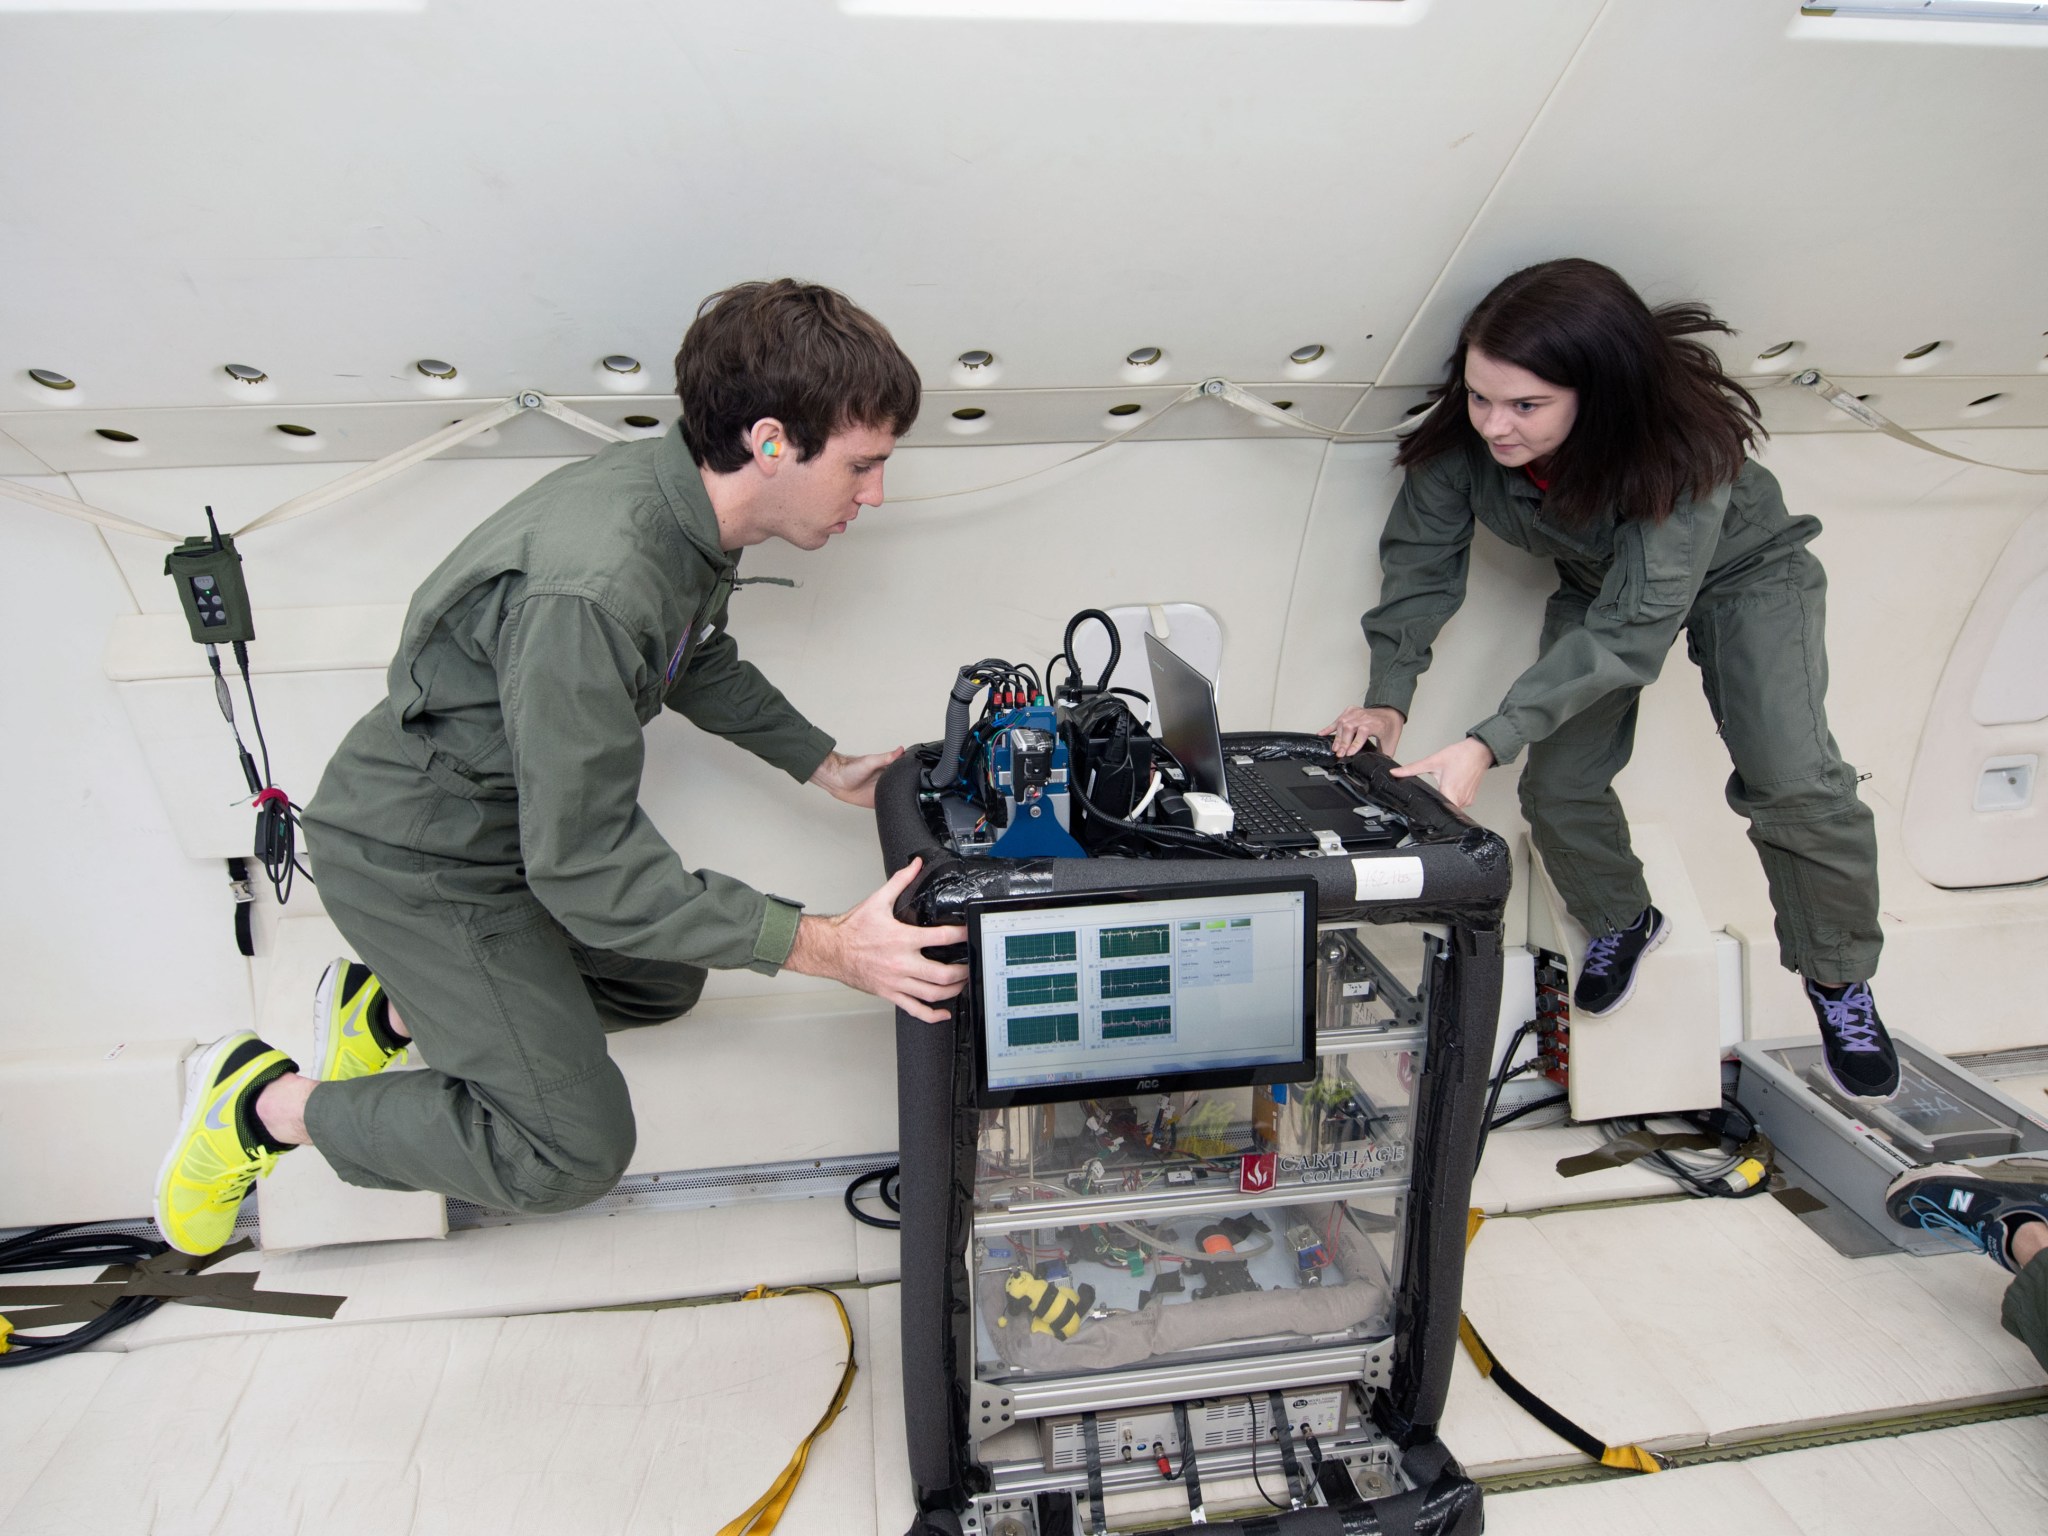 Carthage College researchers testing their propellant mass gauging experiment in zero gravity.